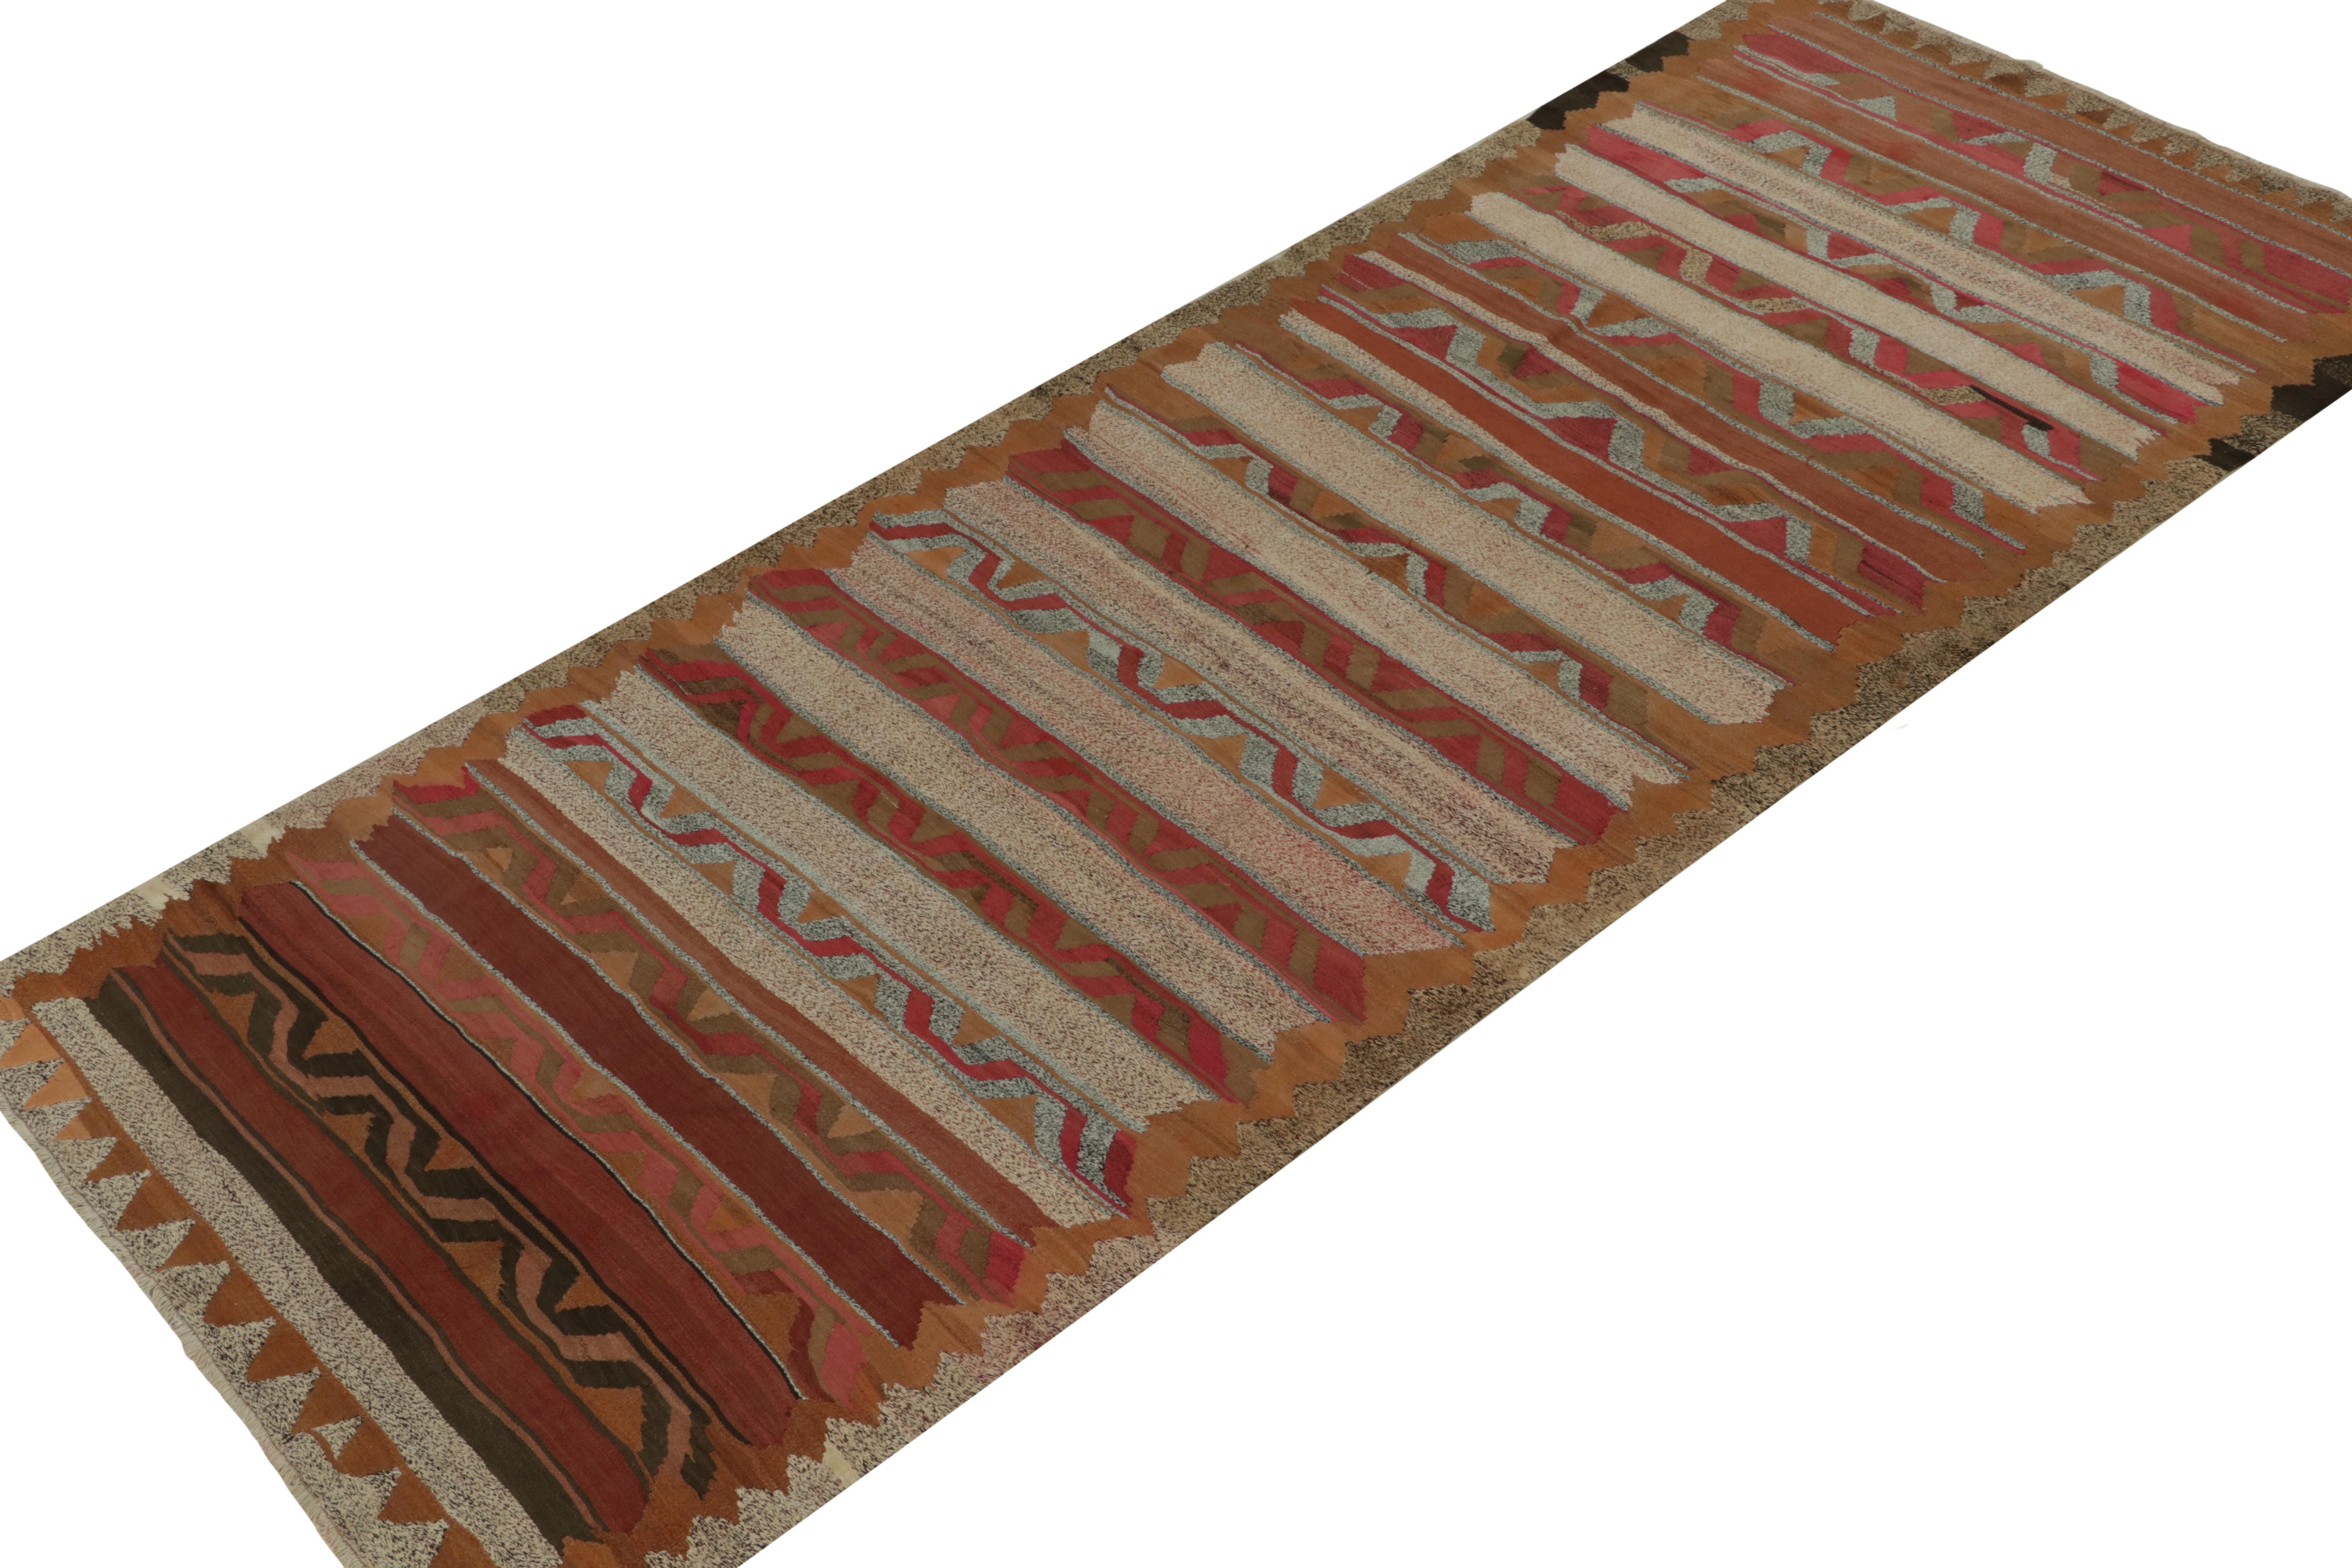 This vintage 5x12 Persian kilim rug is handwoven in wool, and believed to originate circa 1950-1960.

Further on the Design:

This traditional design prefers rich brown and red, but its highlights hint at a more unique tribal provenance. Light